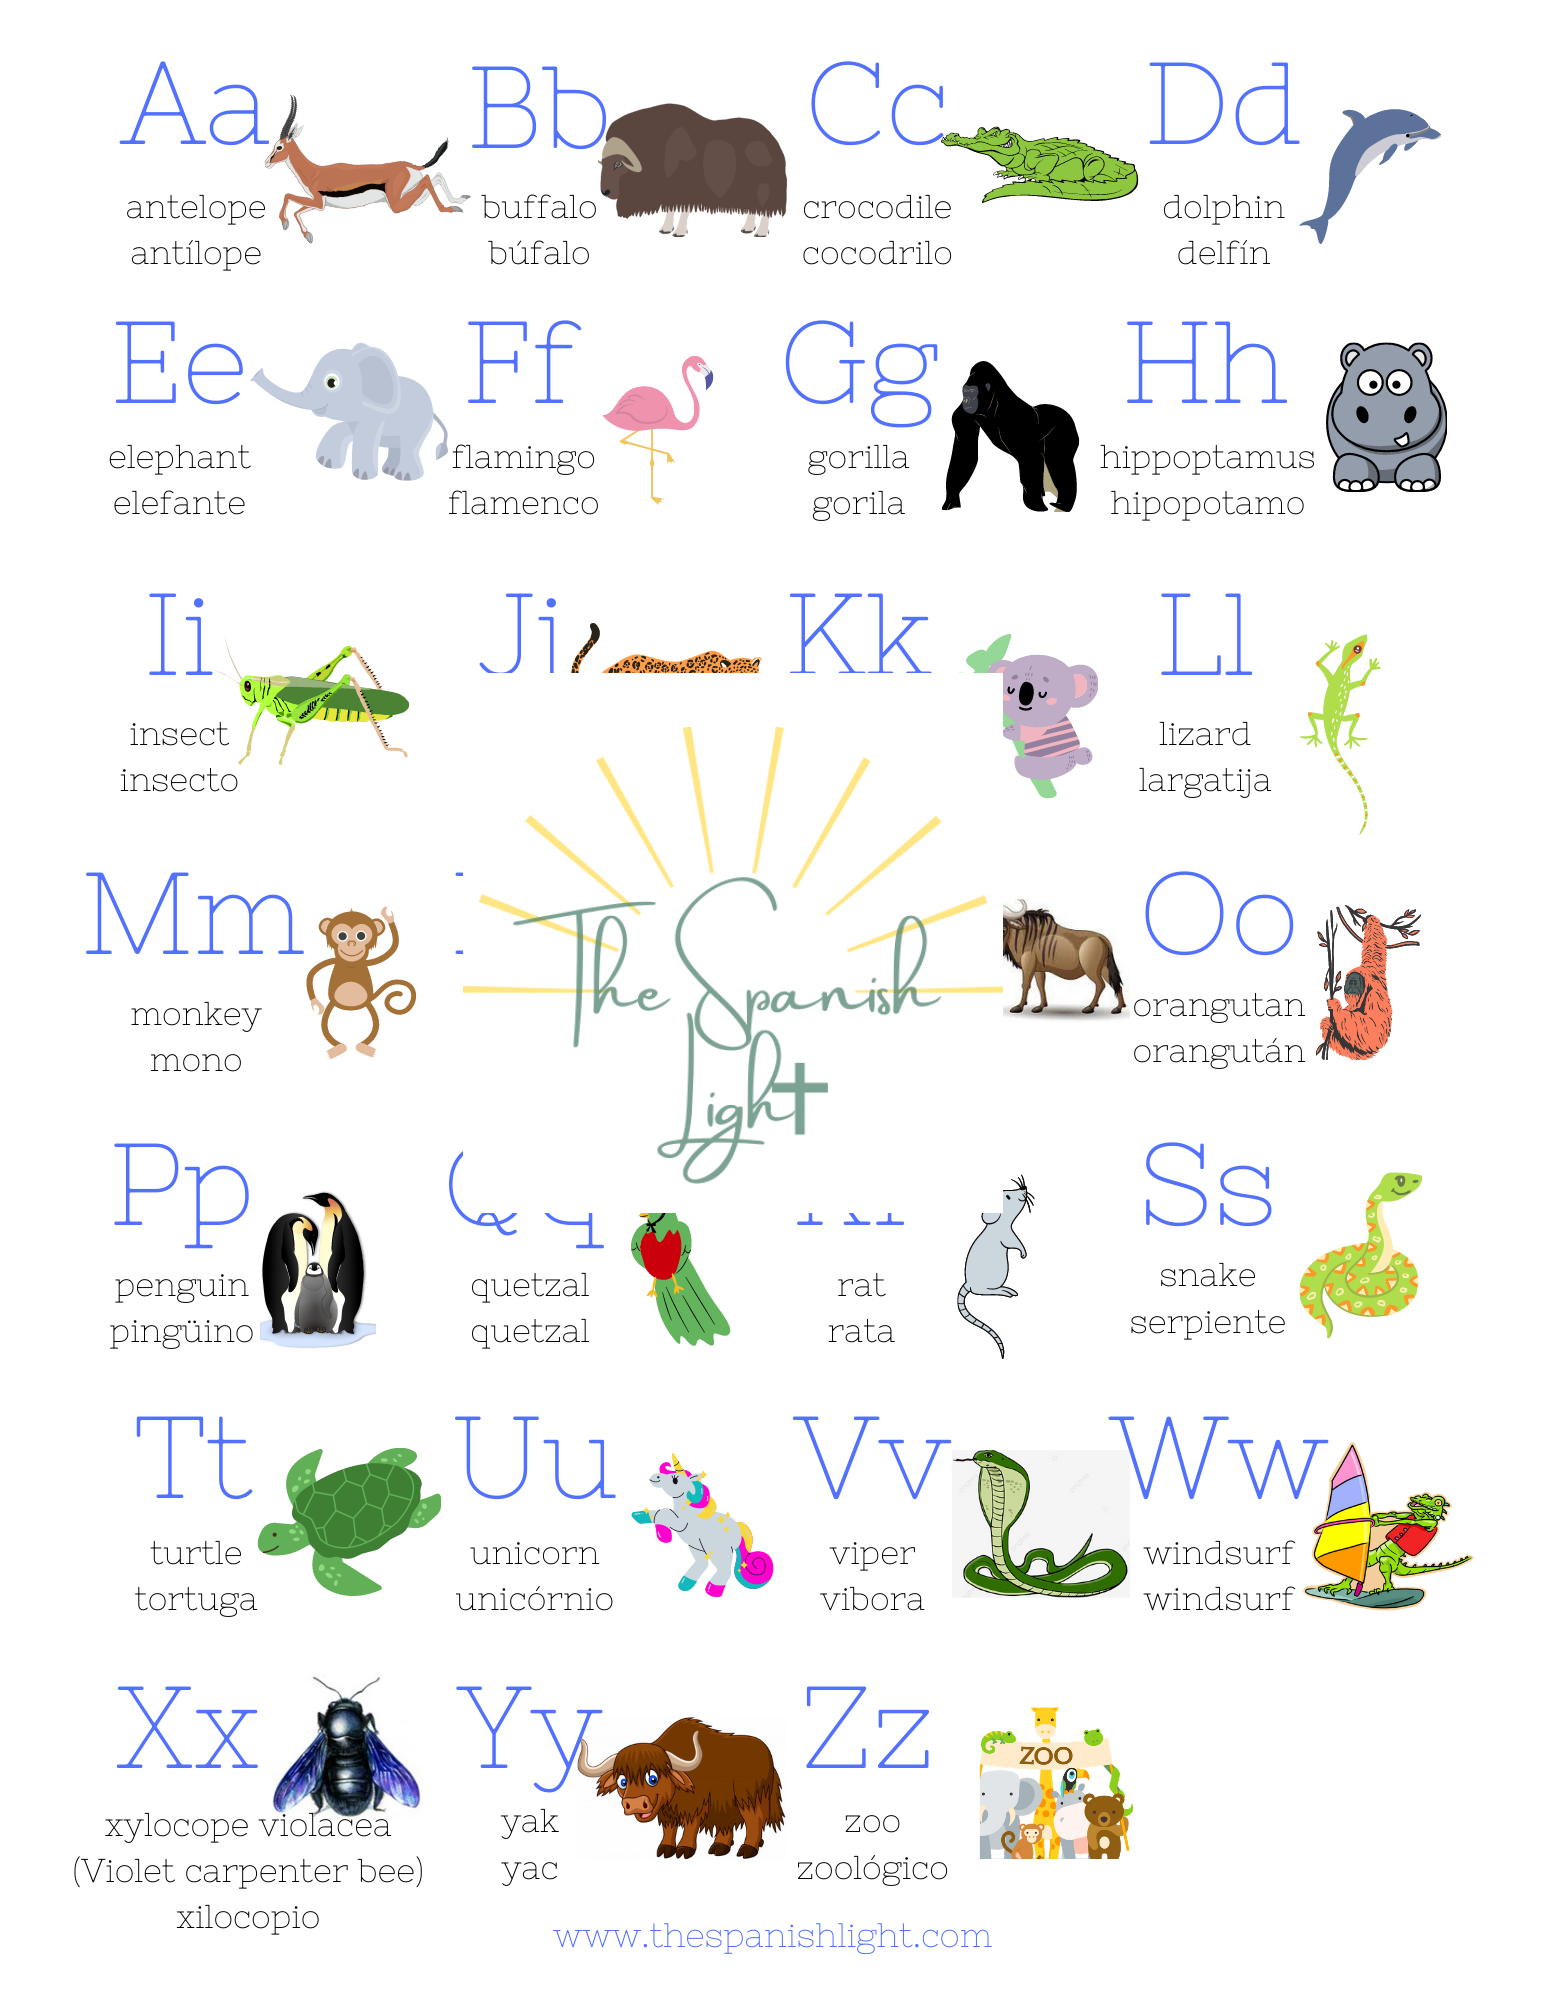 Animals A-Z in Spanish and English Poster - The Spanish Light